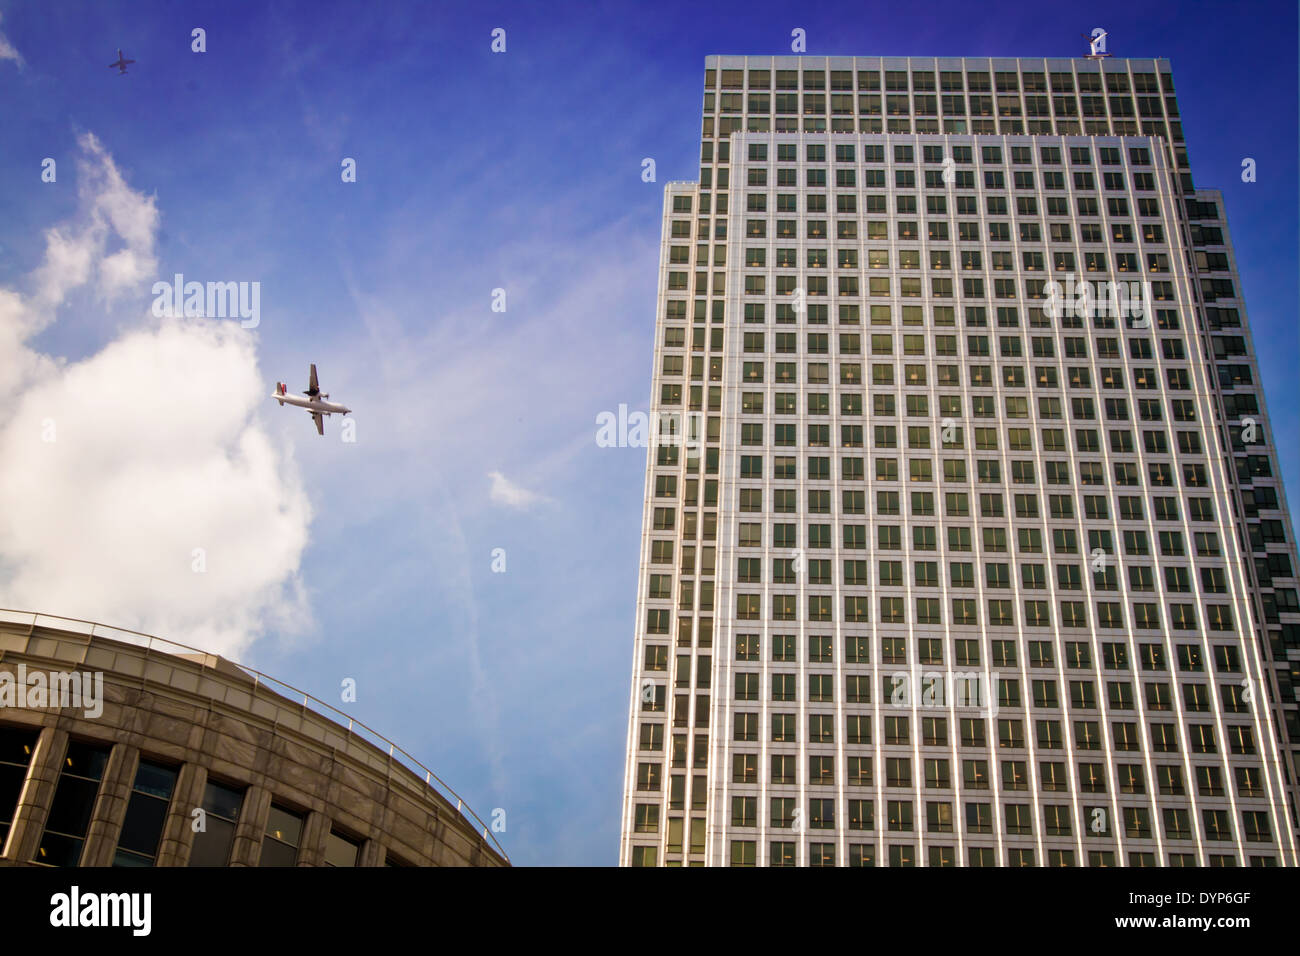 Two planes flying by the One Canada Square skyscraper in the new financial district of Canary Wharf, London, UK. Stock Photo